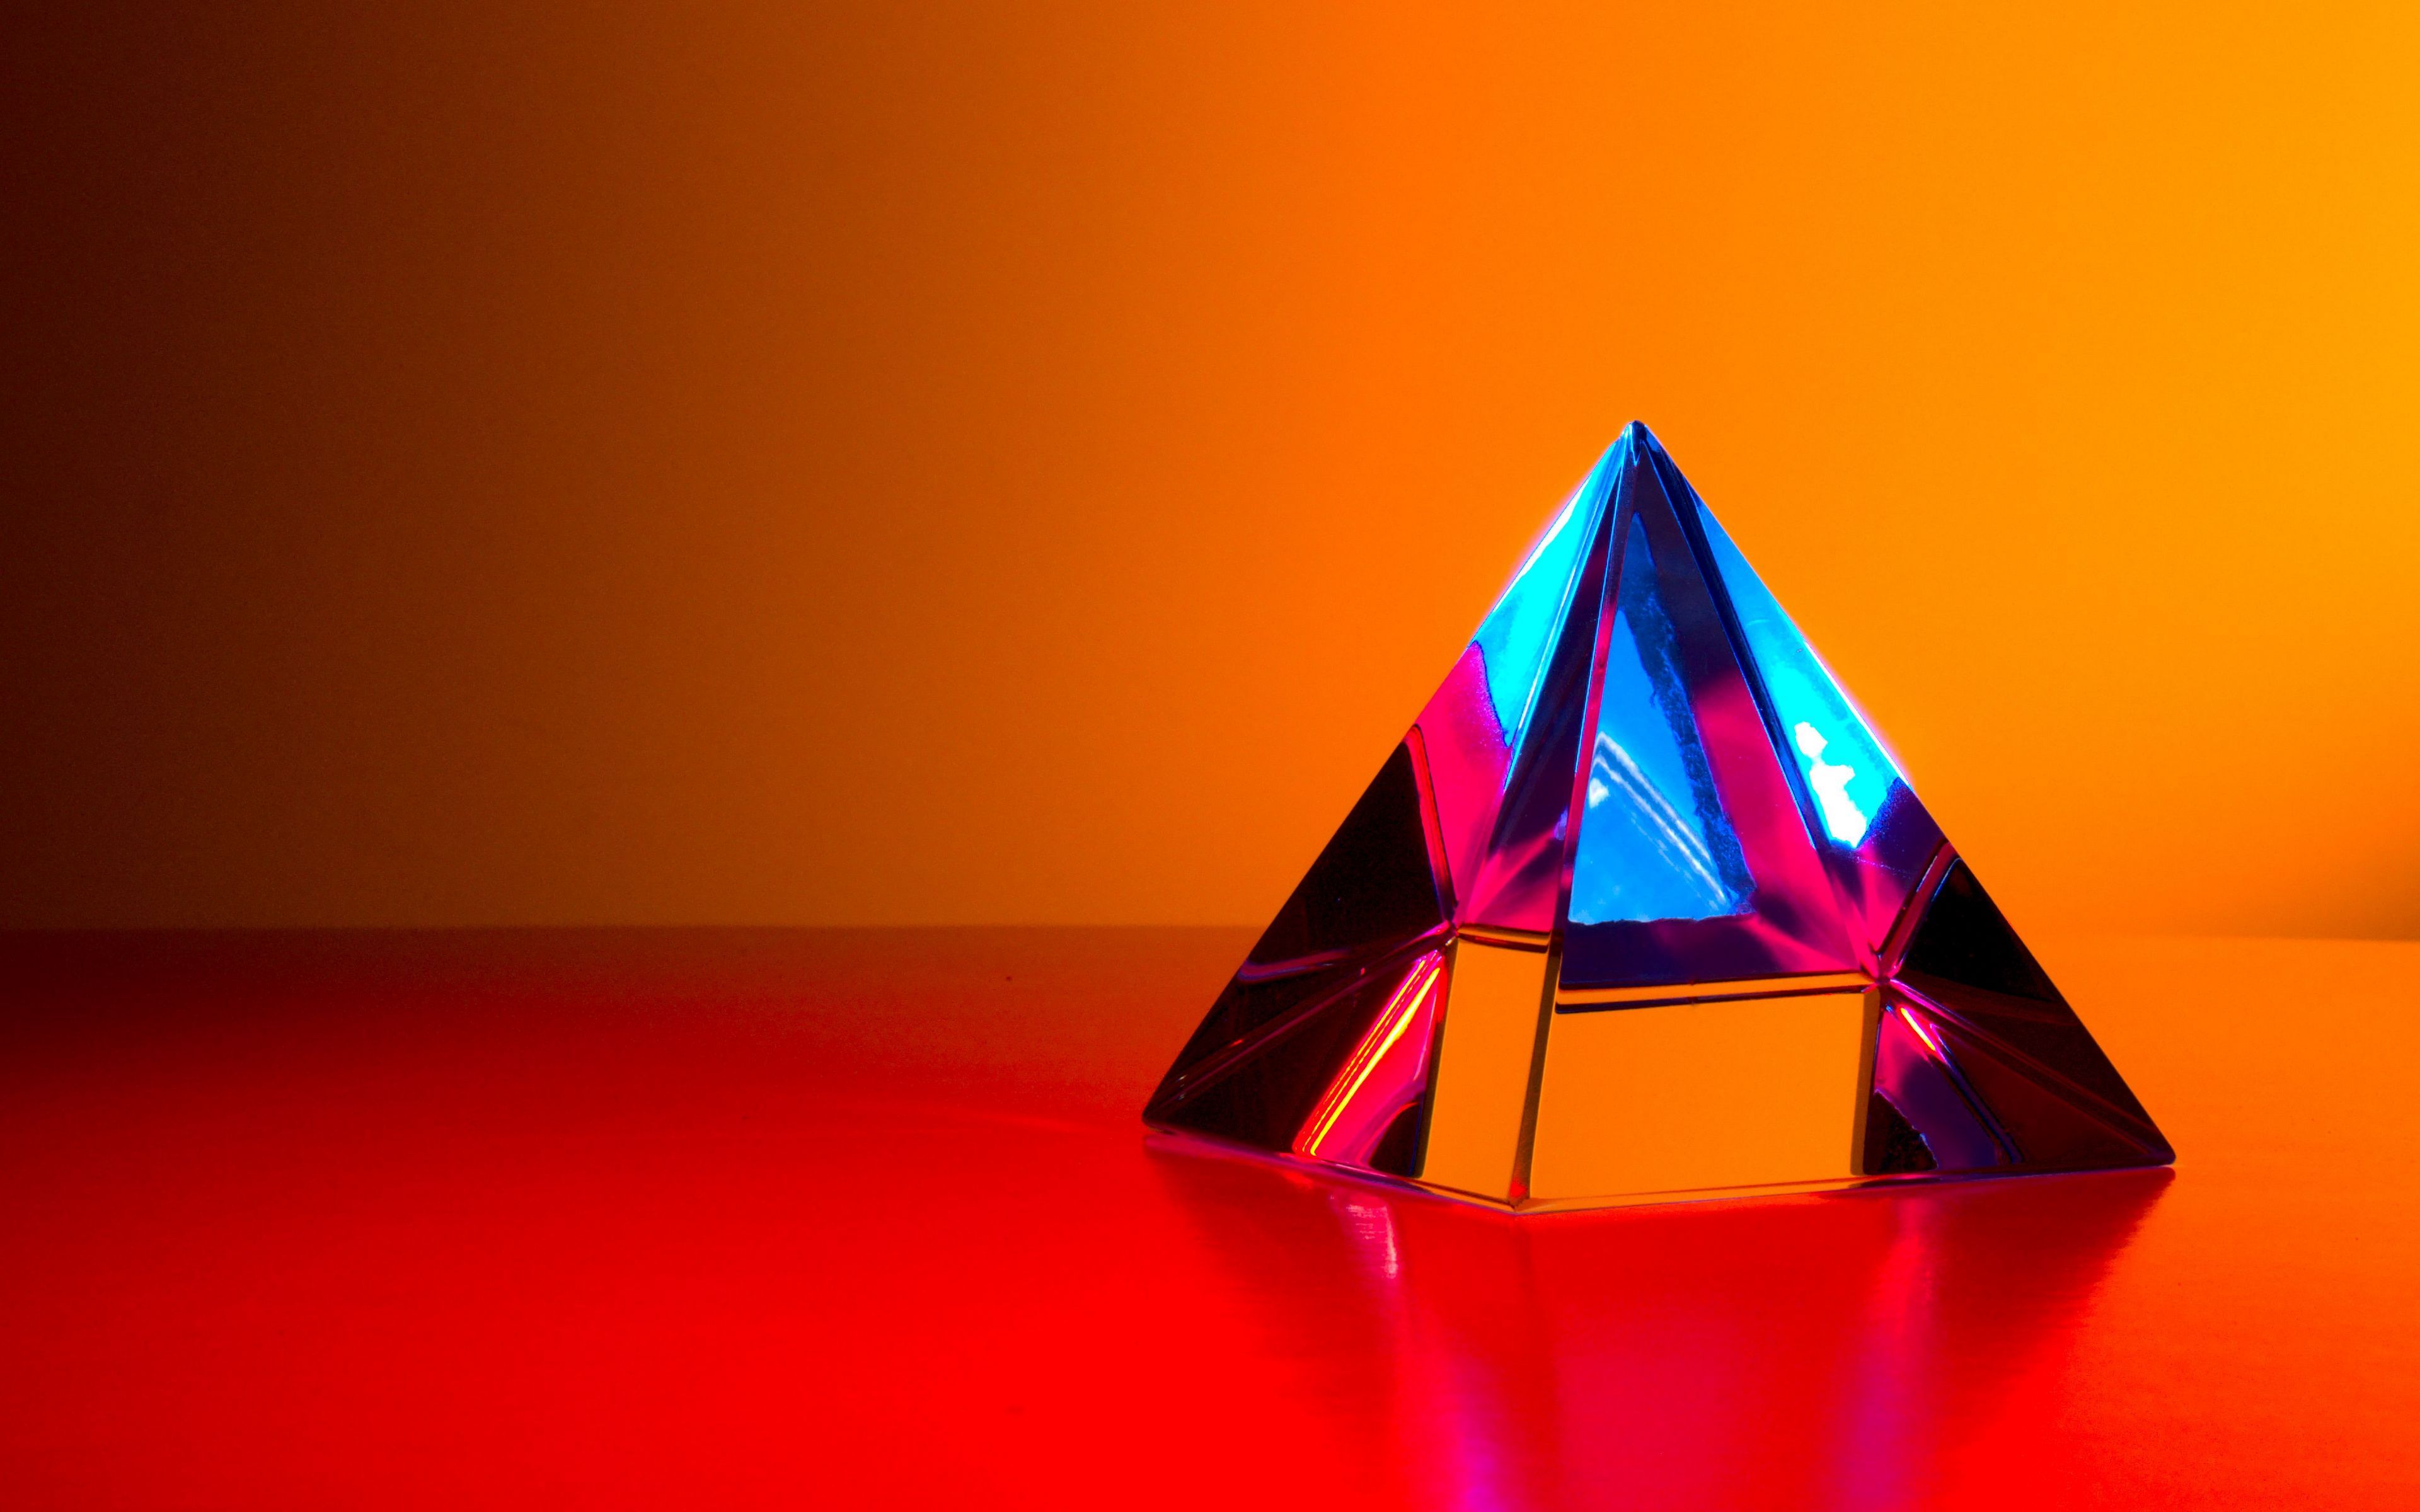 Download wallpapers 3840x2400 pyramid, crystal, reflection, glass 4k ultra hd 16:10 hd backgrounds